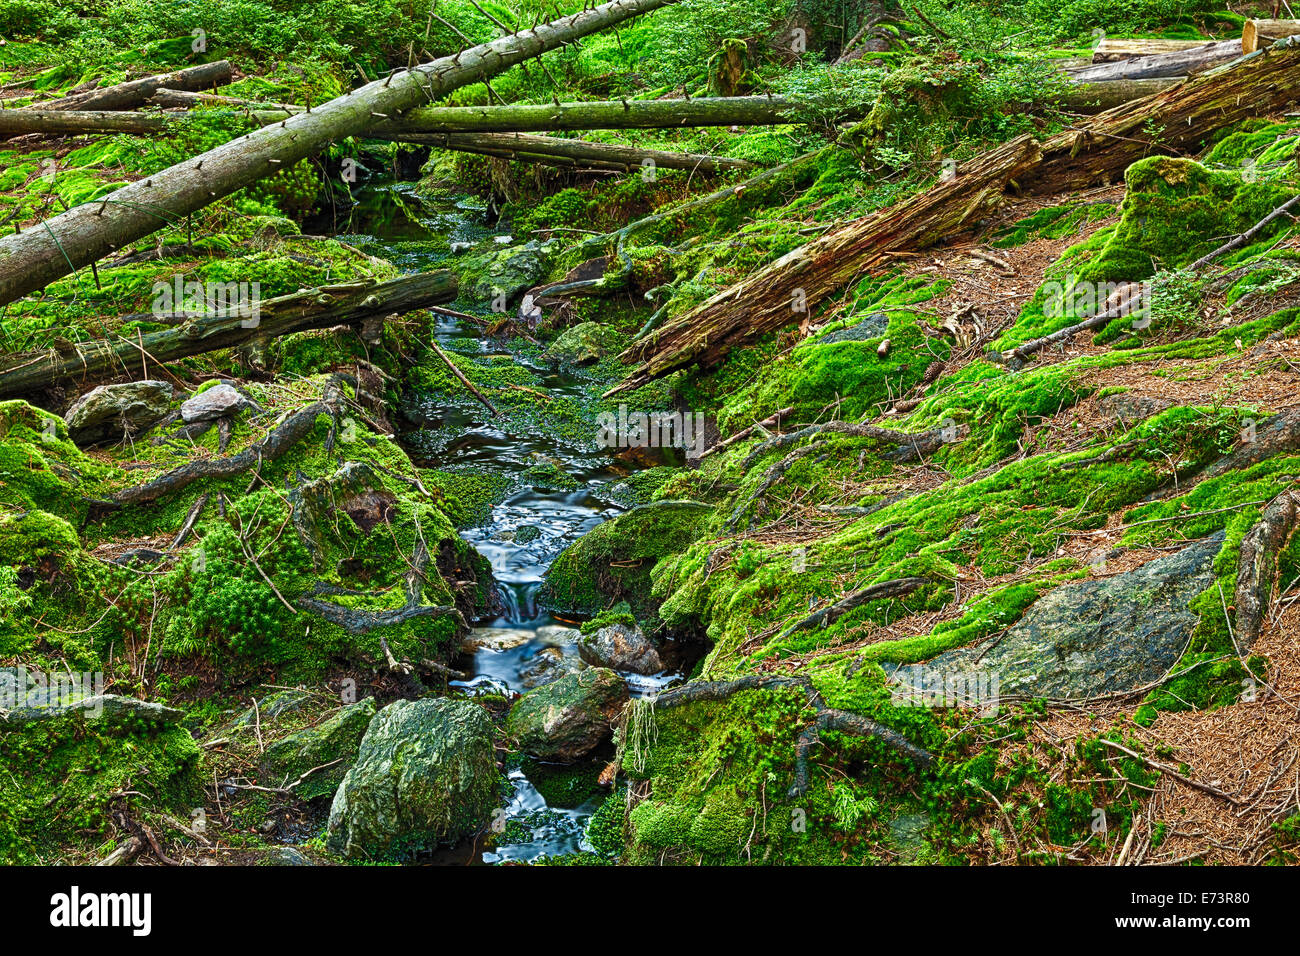 The primeval forest with mossed ground and the creek - HDR Stock Photo